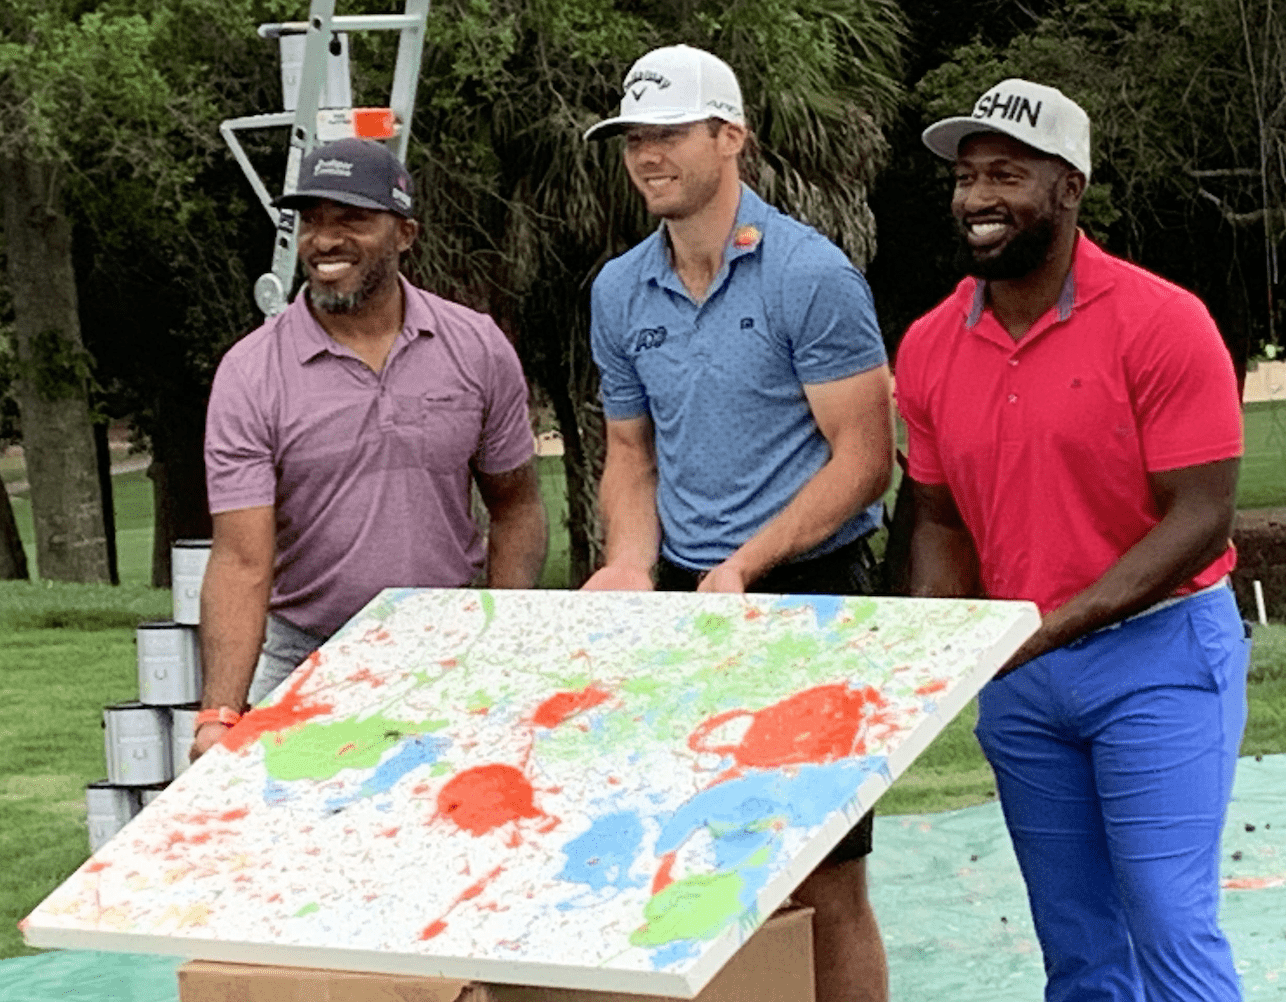 Valspar 2022: Teeing up for "The Most Colorful PGA Tour Tournament" -  Registry Tampa Bay